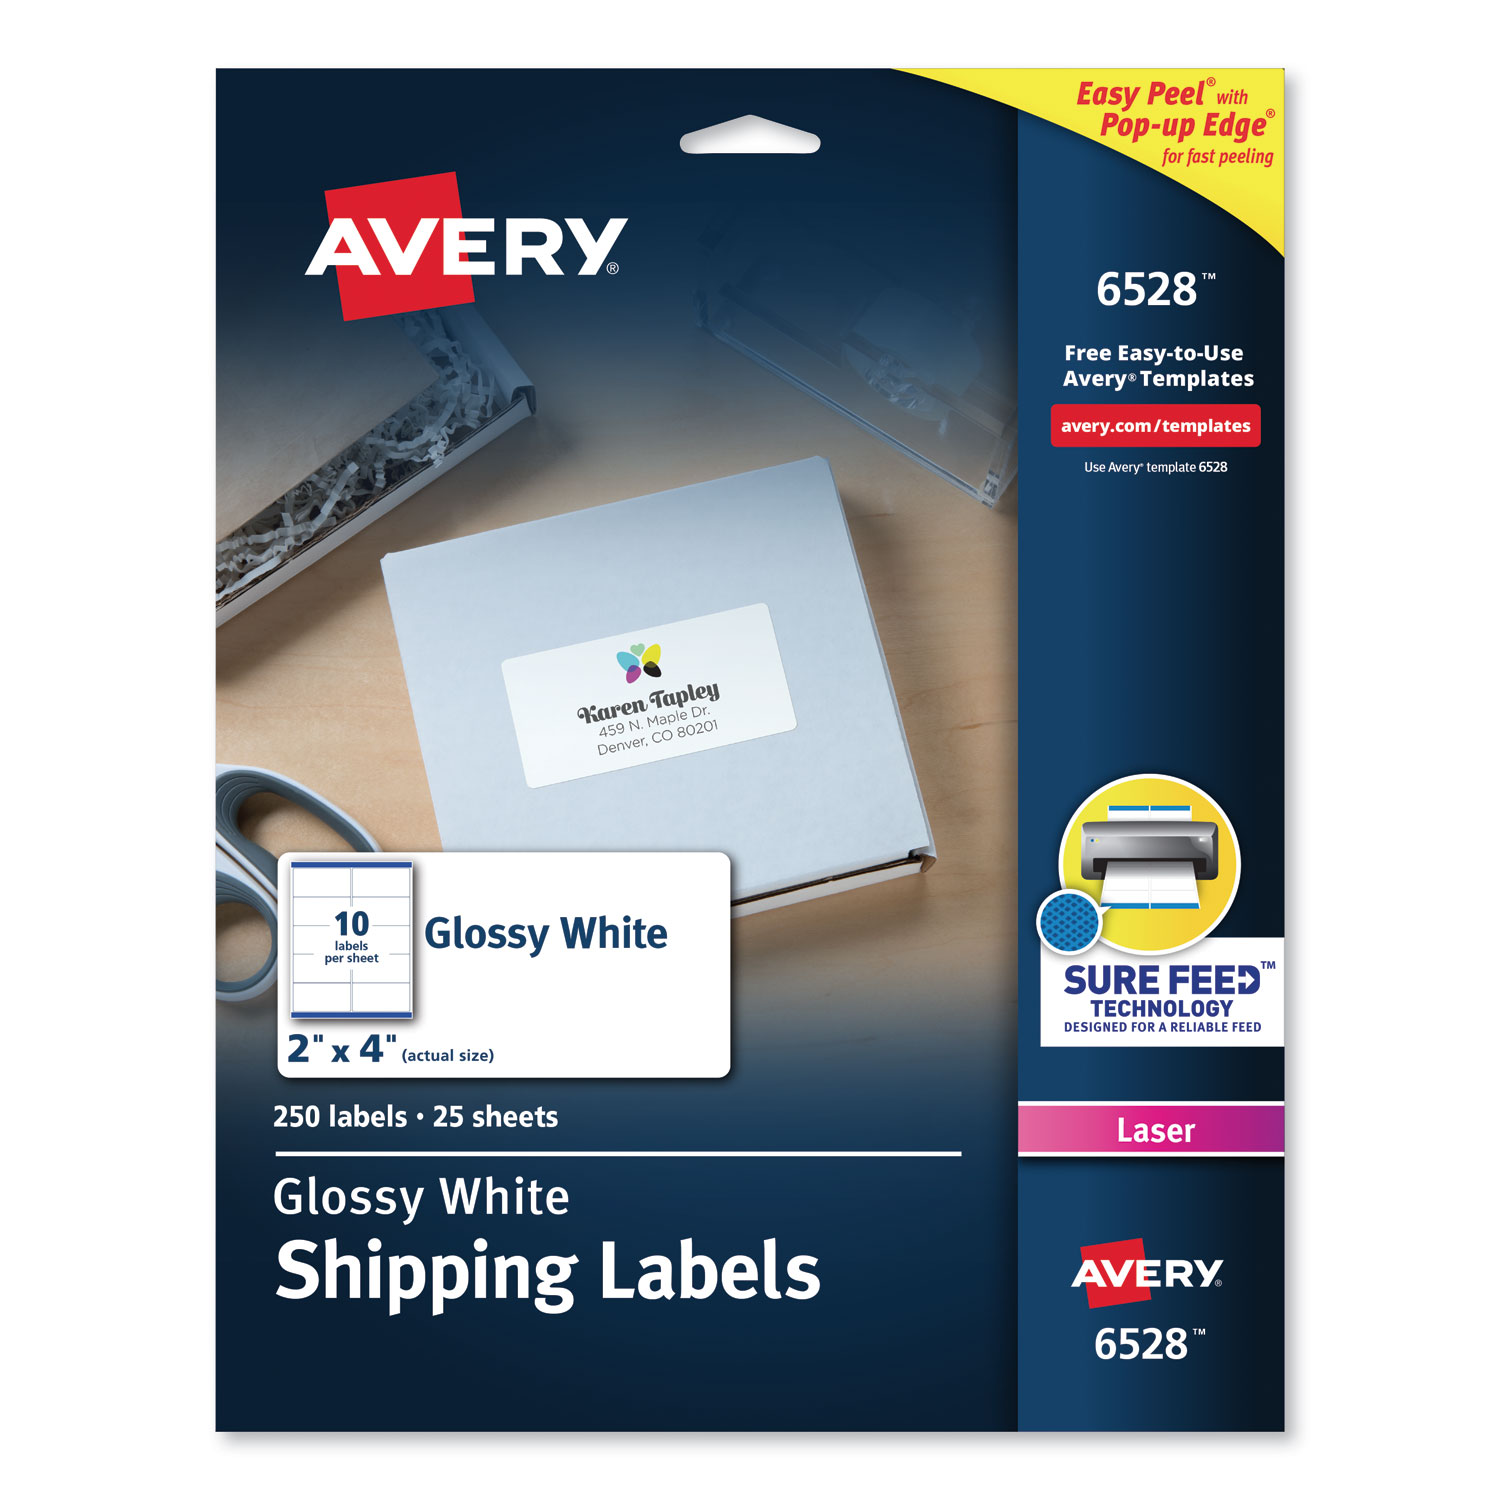  Avery 06528 Glossy White Easy Peel Mailing Labels w/ Sure Feed Technology, Laser Printers, 2 x 4, White, 10/Sheet, 25 Sheets/Pack (AVE6528) 